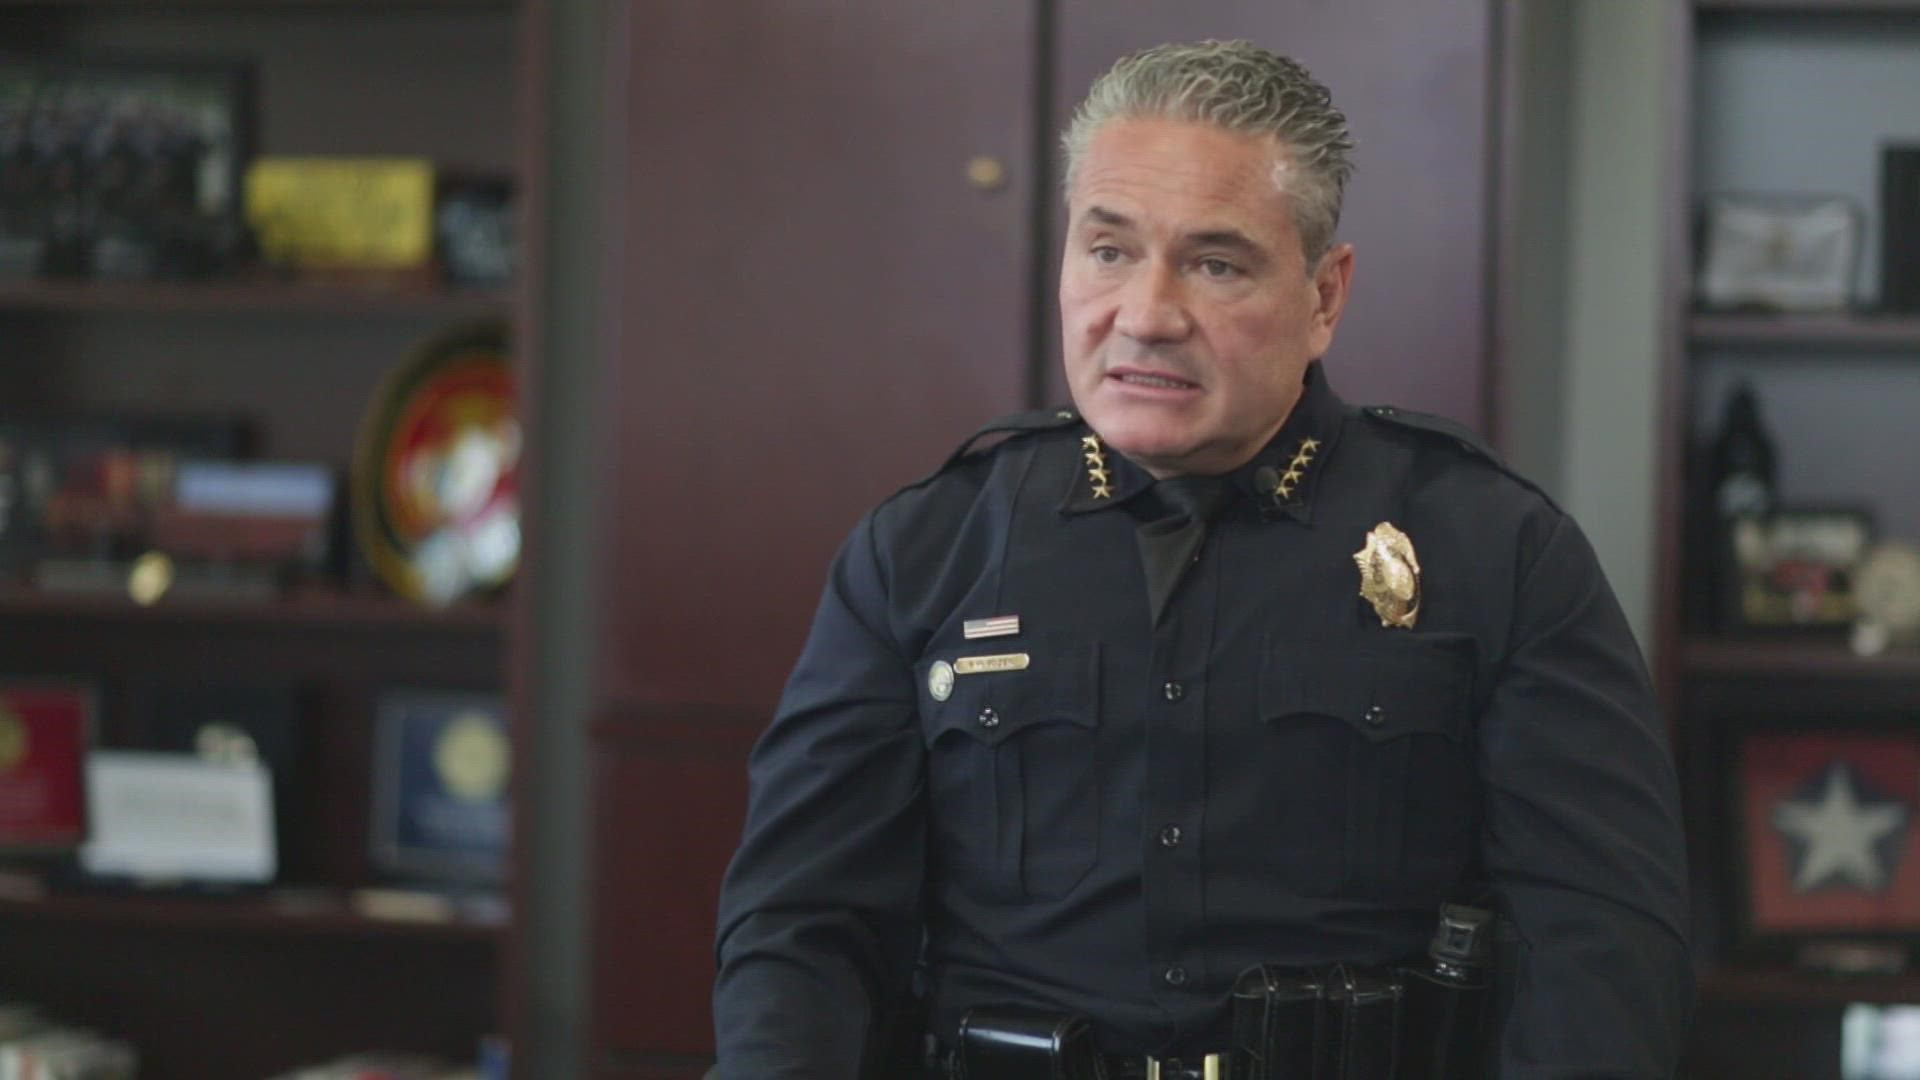 Chief Paul Pazen will officially step down on Saturday after four years on the job.